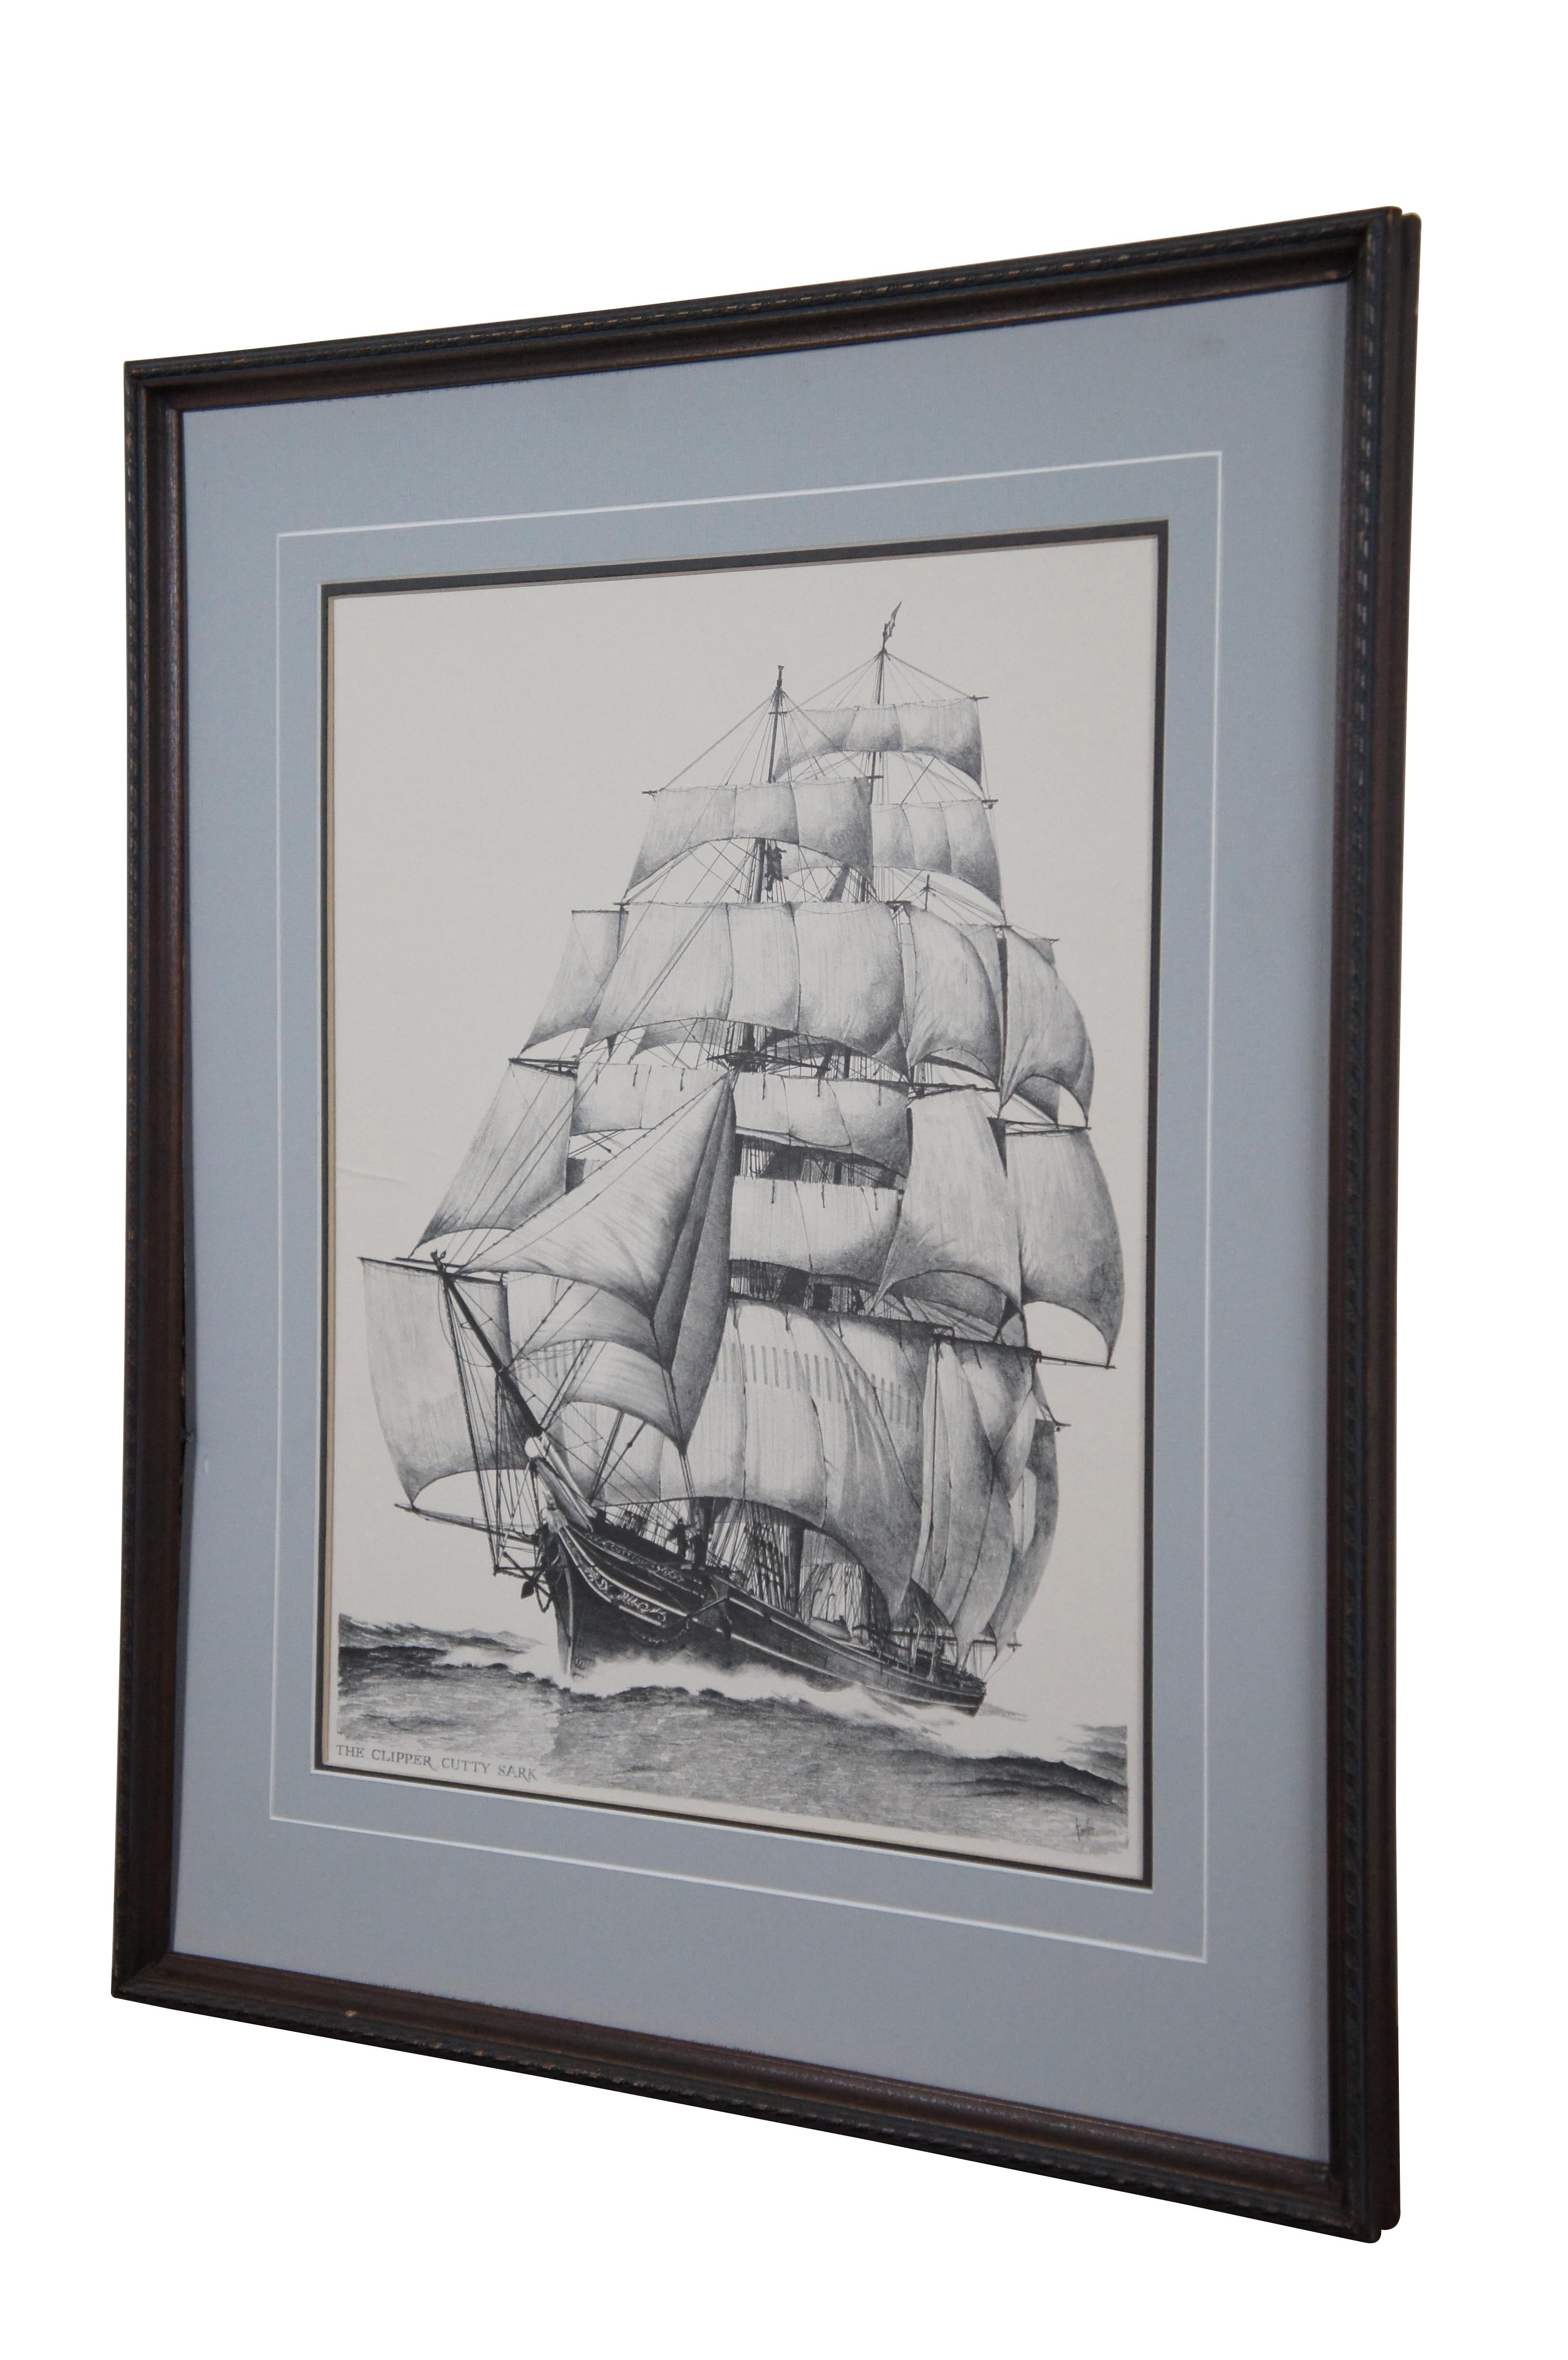 Late 20th century black and white seascape lithograph print depicting “The Clipper Cutty Sark” from an engraving by Fowler. Displayed in a neatly carved dark wood frame.

Cutty Sark is a British clipper ship. Built on the River Leven, Dumbarton,